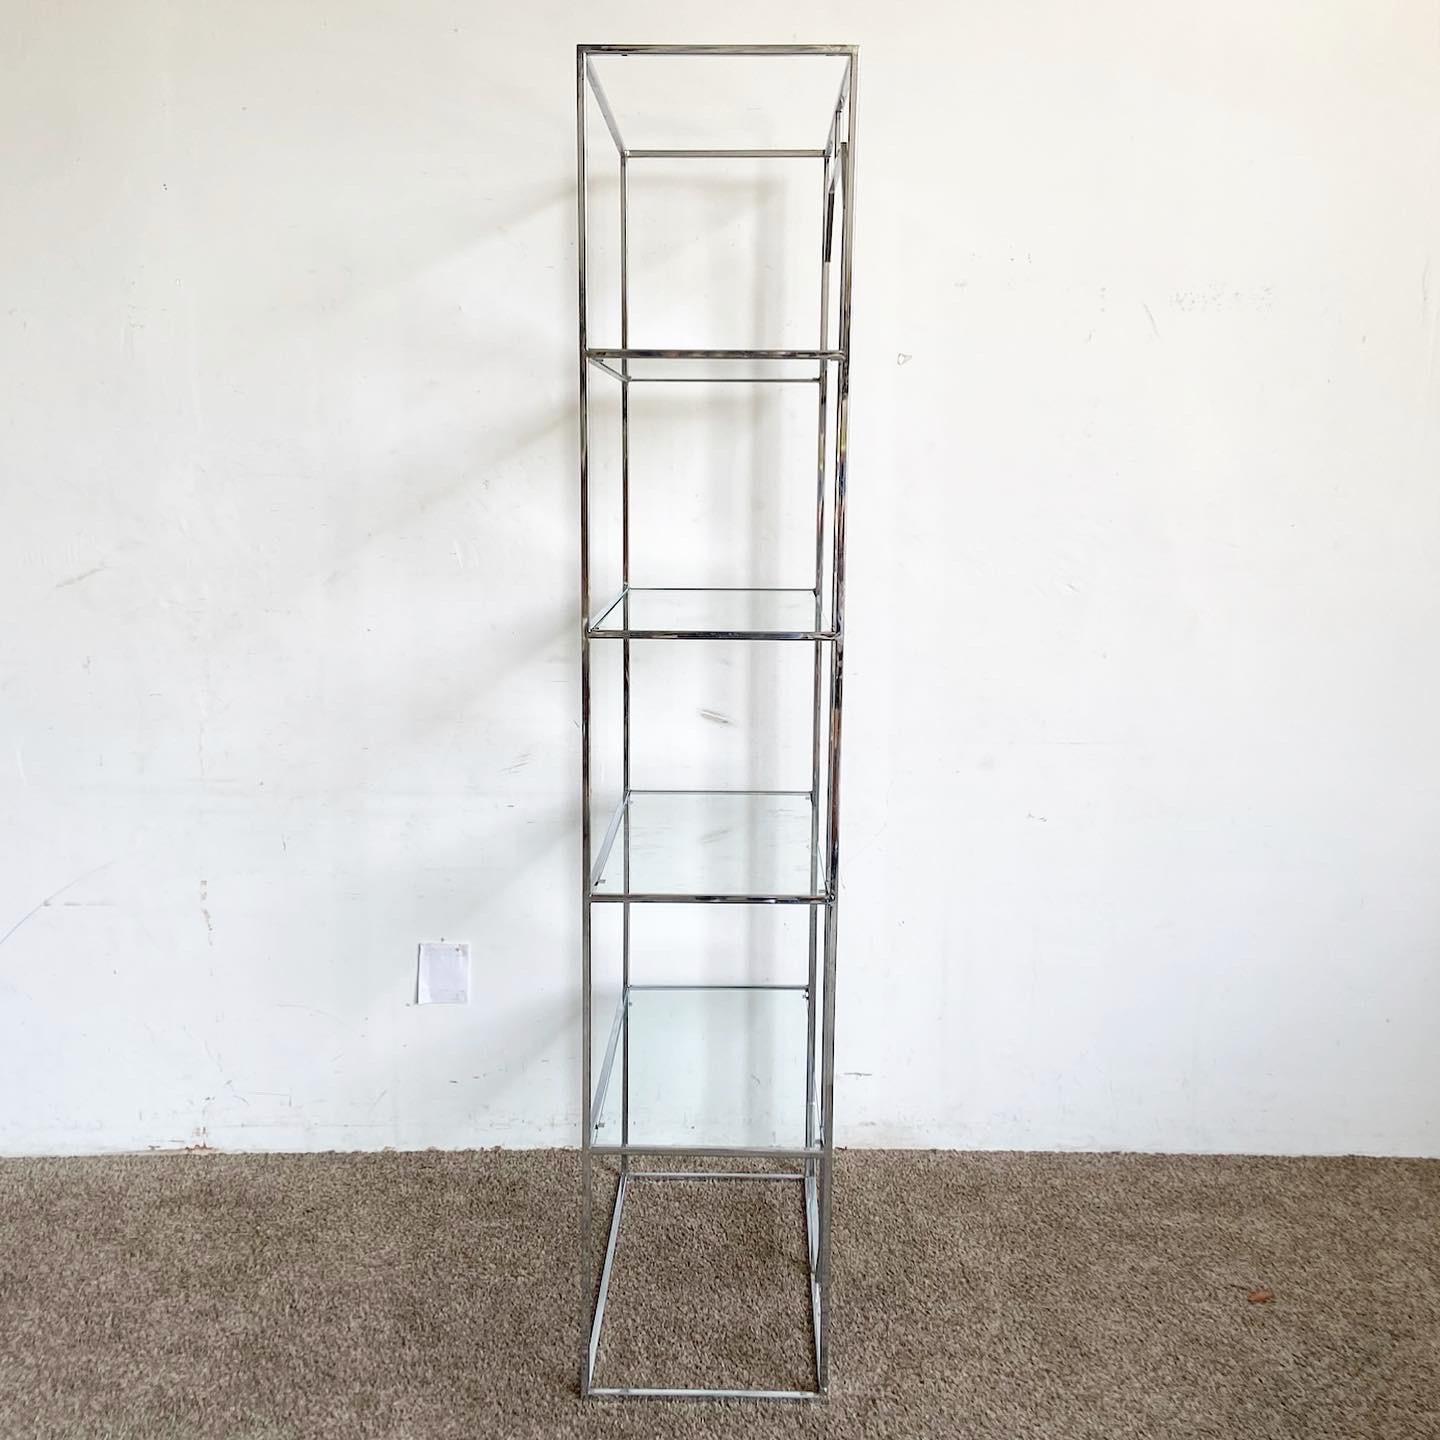 Elevate your space with this Postmodern Chrome Glass 4-Shelf Etagere. With its sleek chrome frame and transparent glass shelves, this unit is a perfect blend of form and function. Ideal for various settings, it offers ample display space without